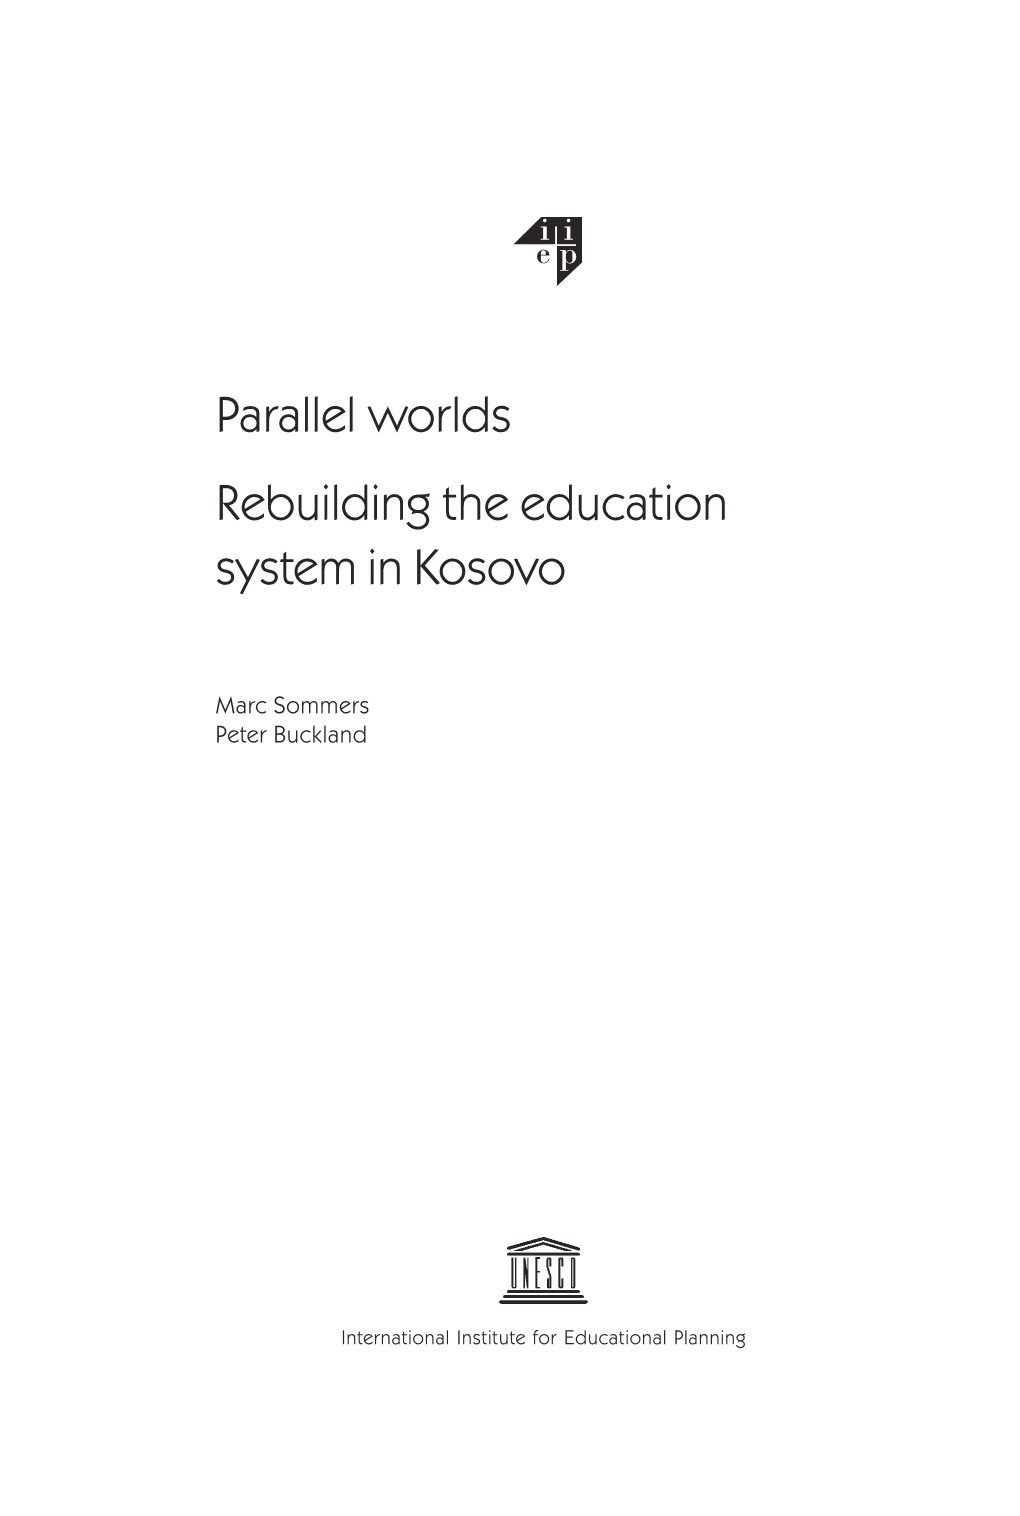 Parallel Worlds: Rebuilding the Education System in Kosovo